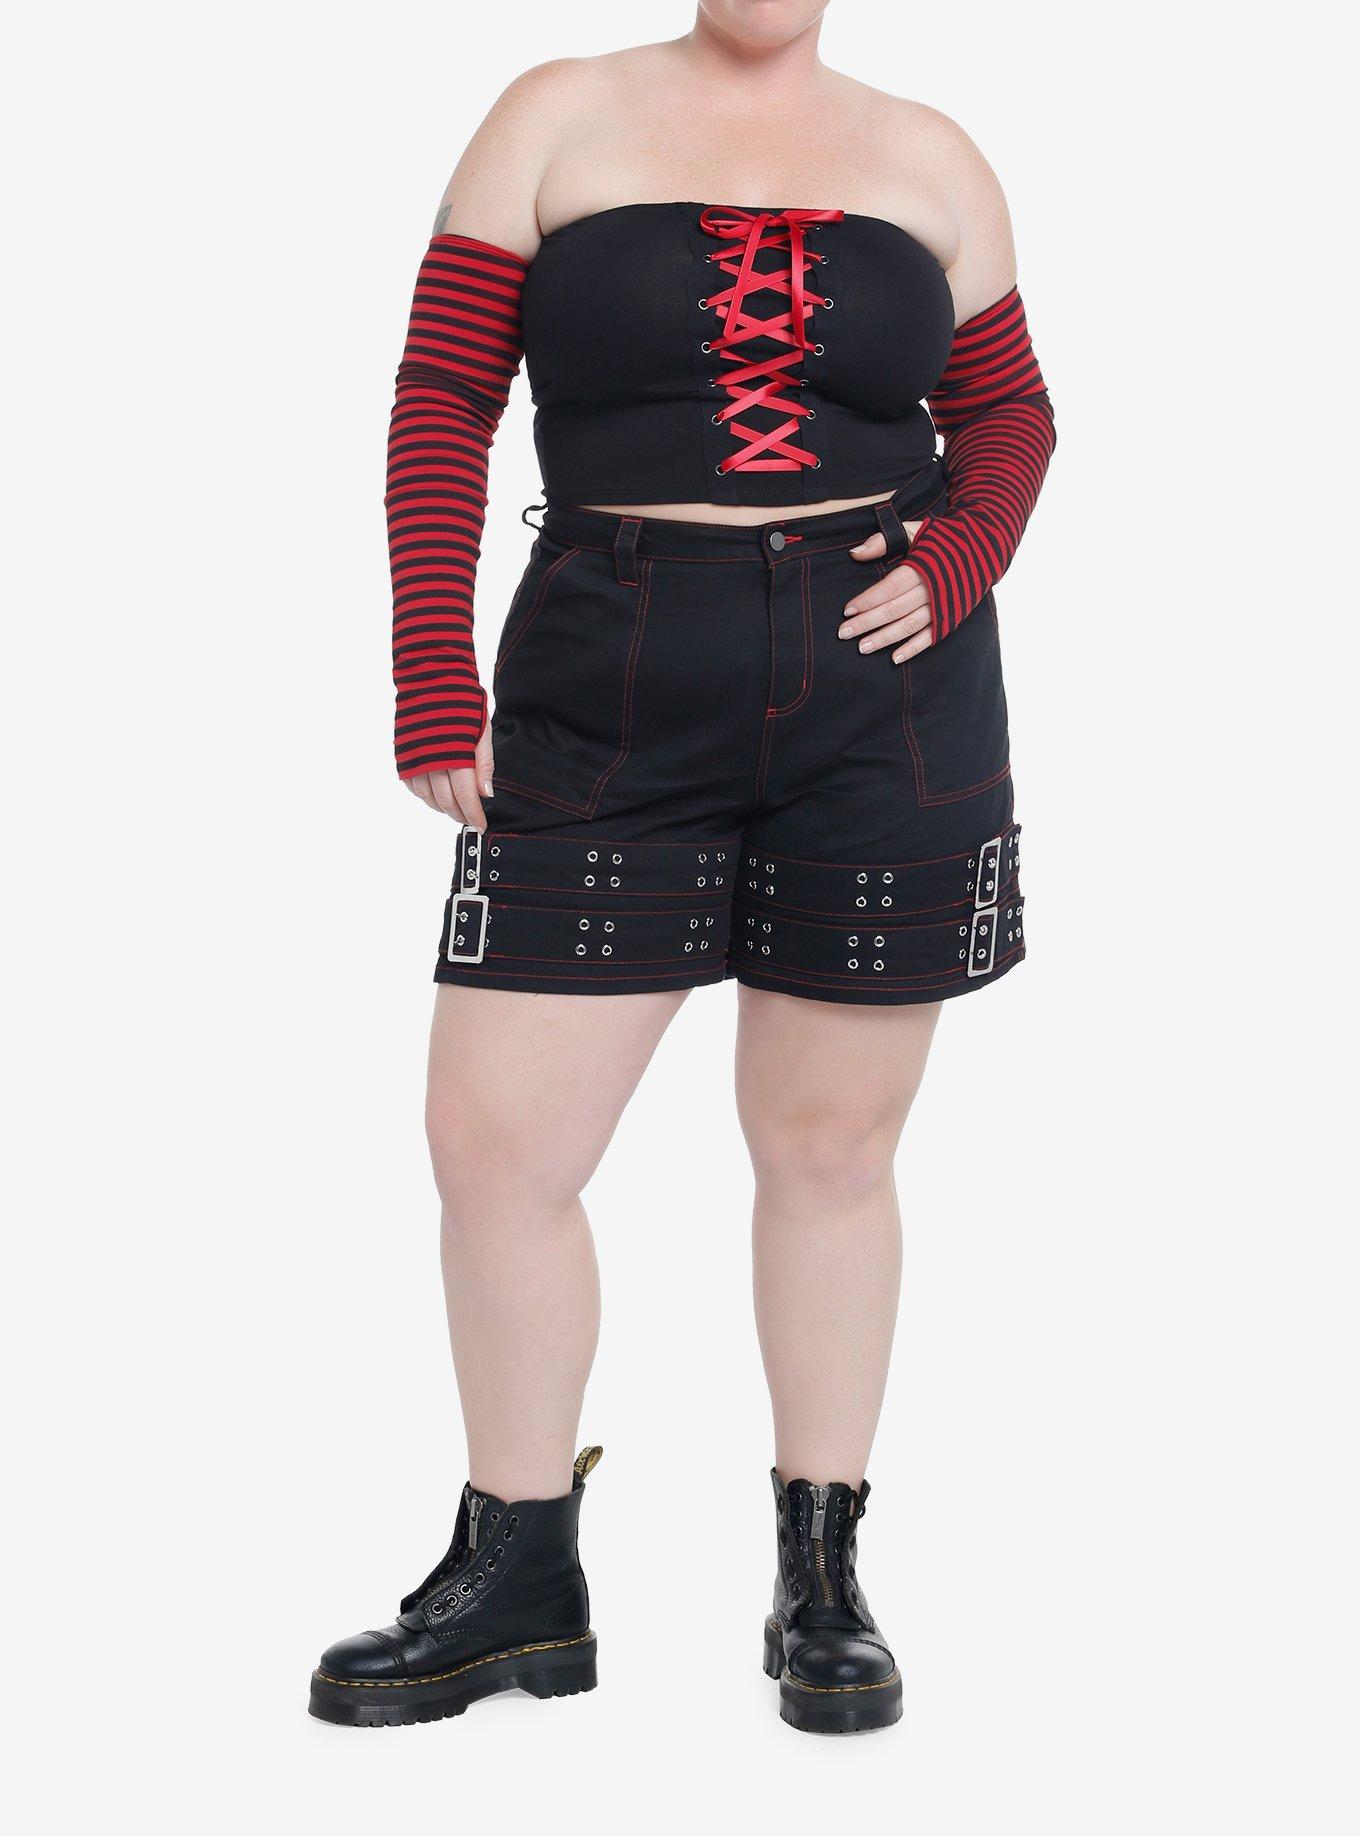 Red & Black Tube Top With Stripe Arm Warmers Plus Size, STRIPE - RED, alternate